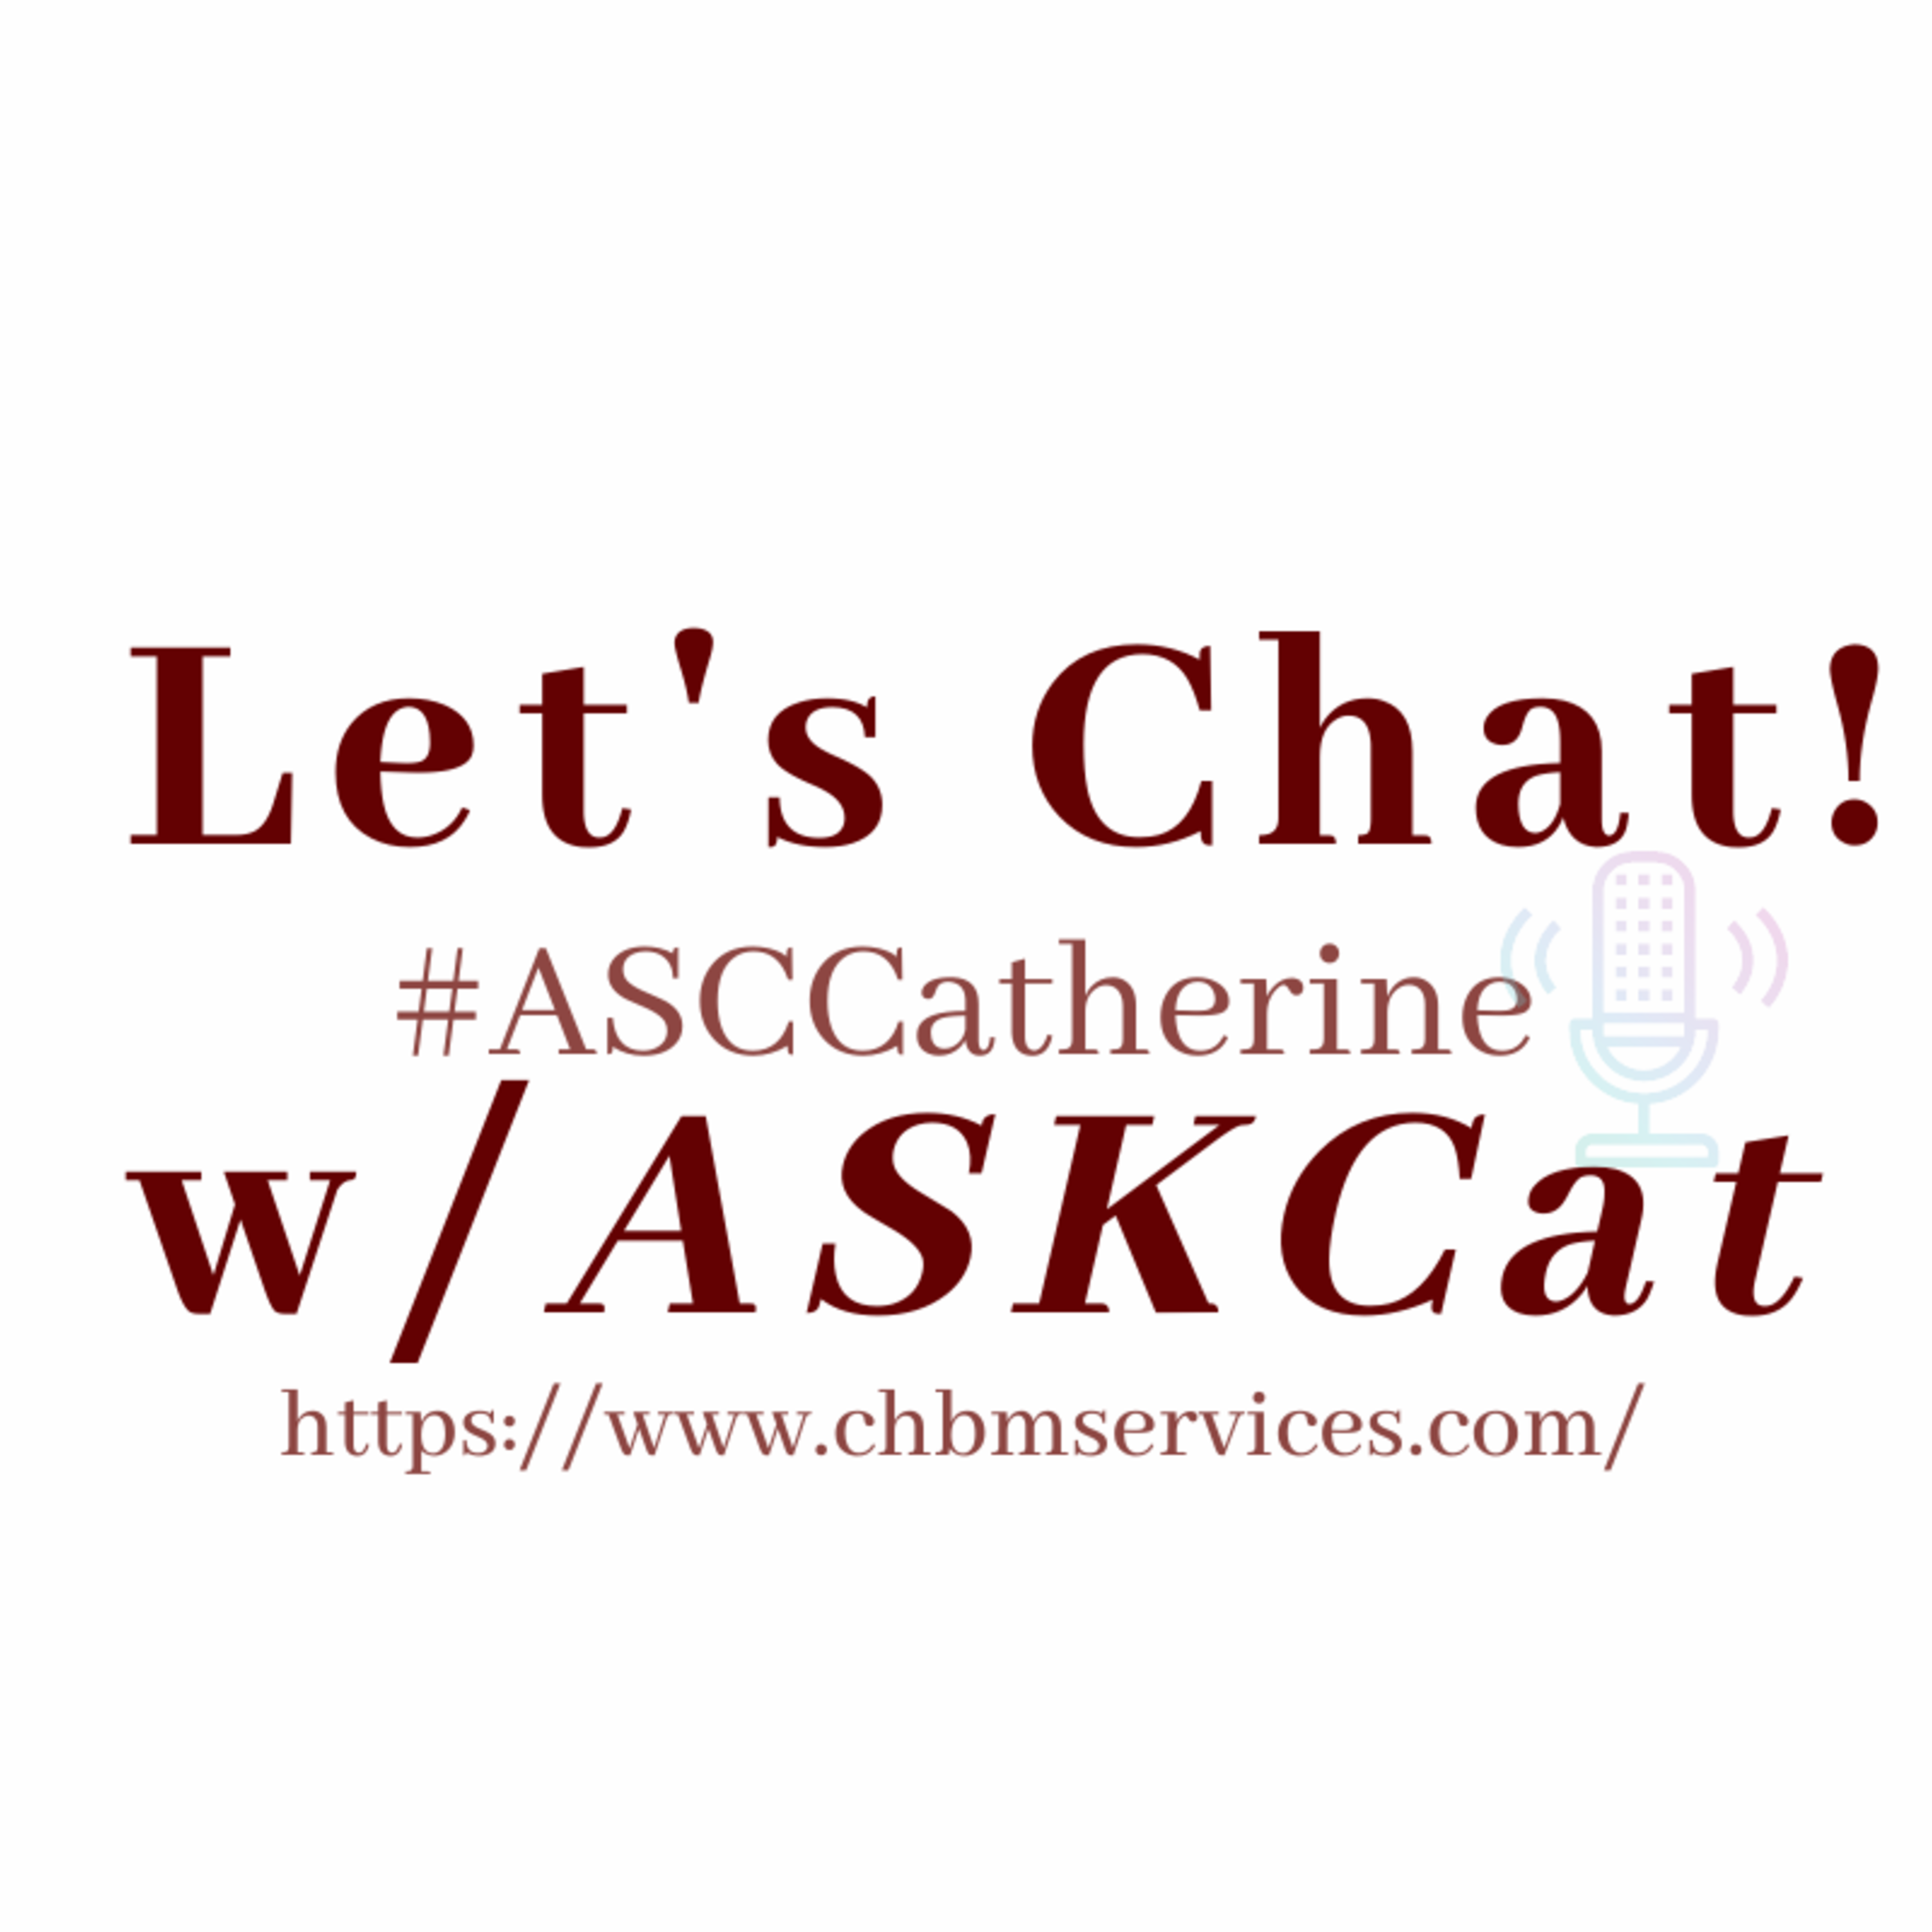 "Let's Chat" w/ASK Cat